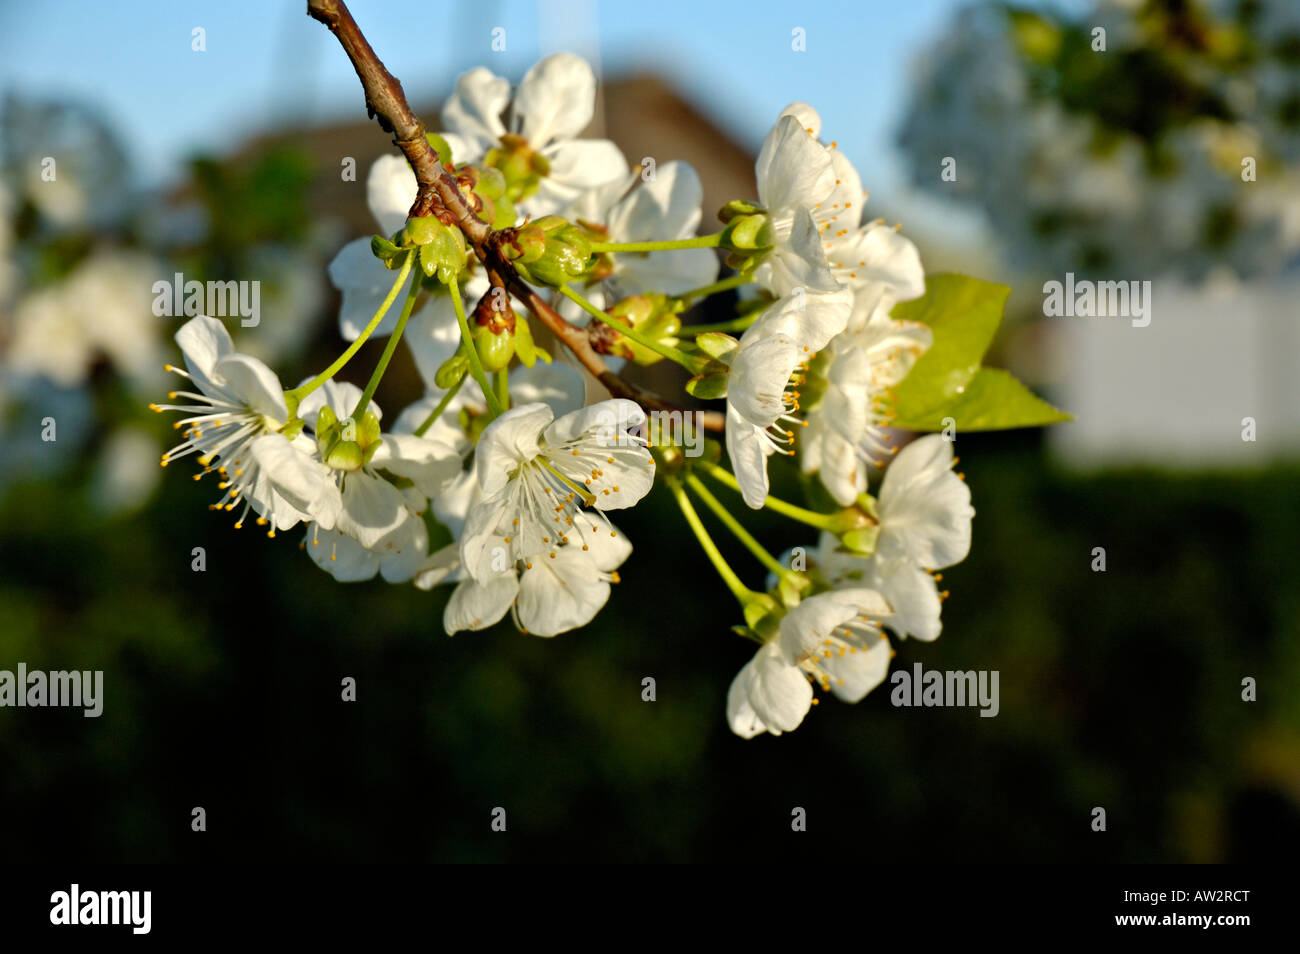 Blossoms on a sour cherry tree (prunus cerasus) against unsharp background. Stock Photo